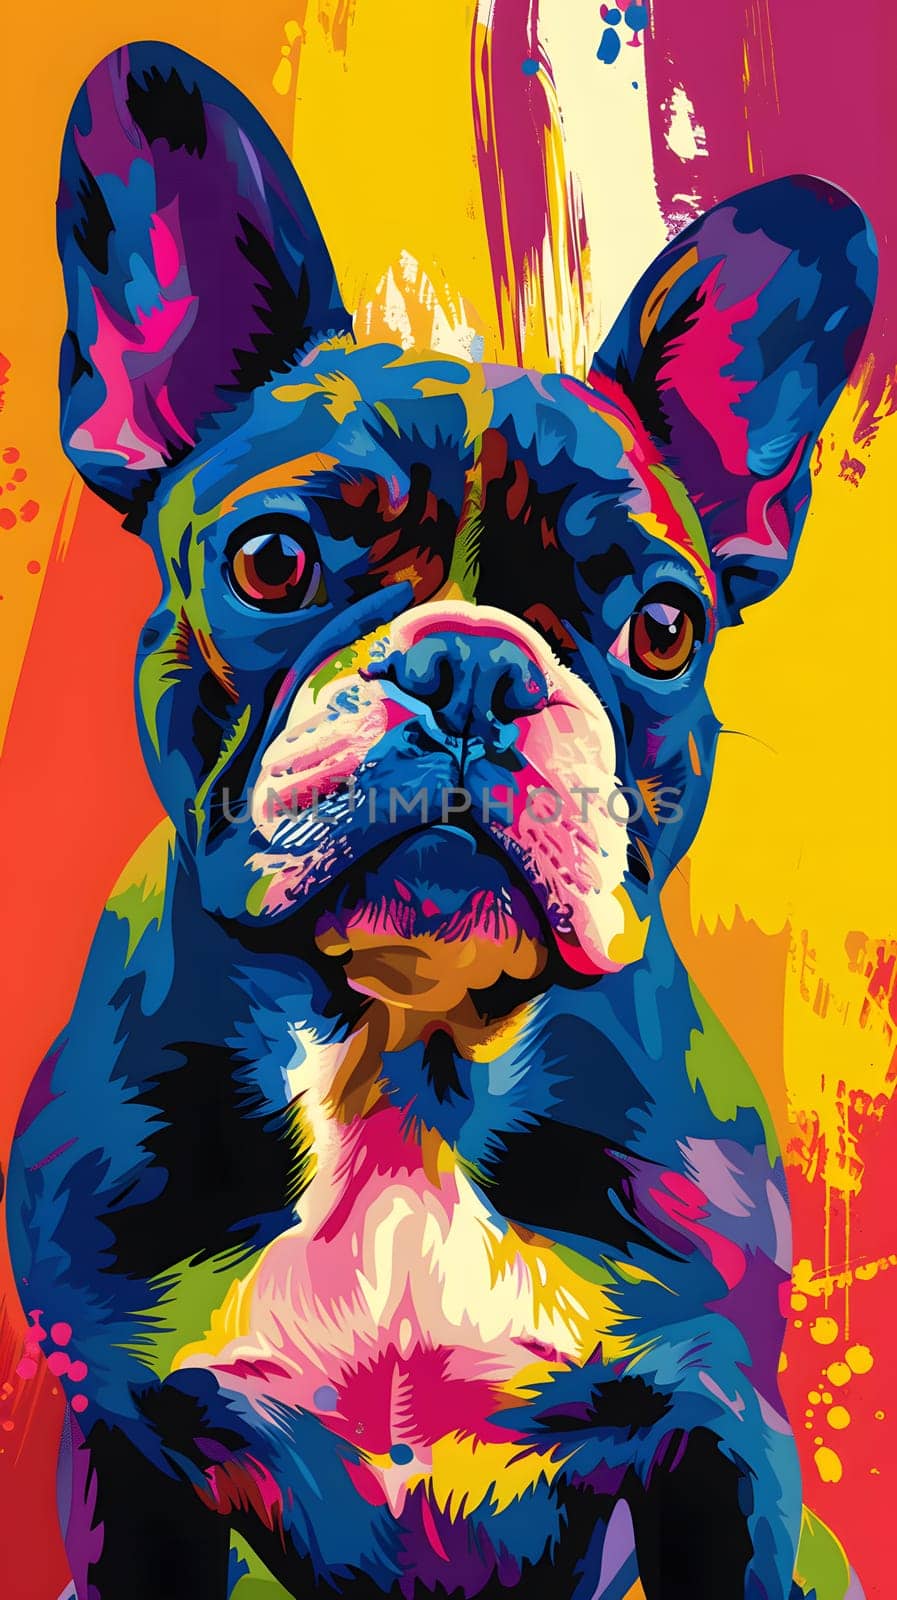 A vibrant painting featuring a French Bulldog on a colorful background. This carnivorous mammal is depicted in pink hues, showcasing its role as a working and companion dog